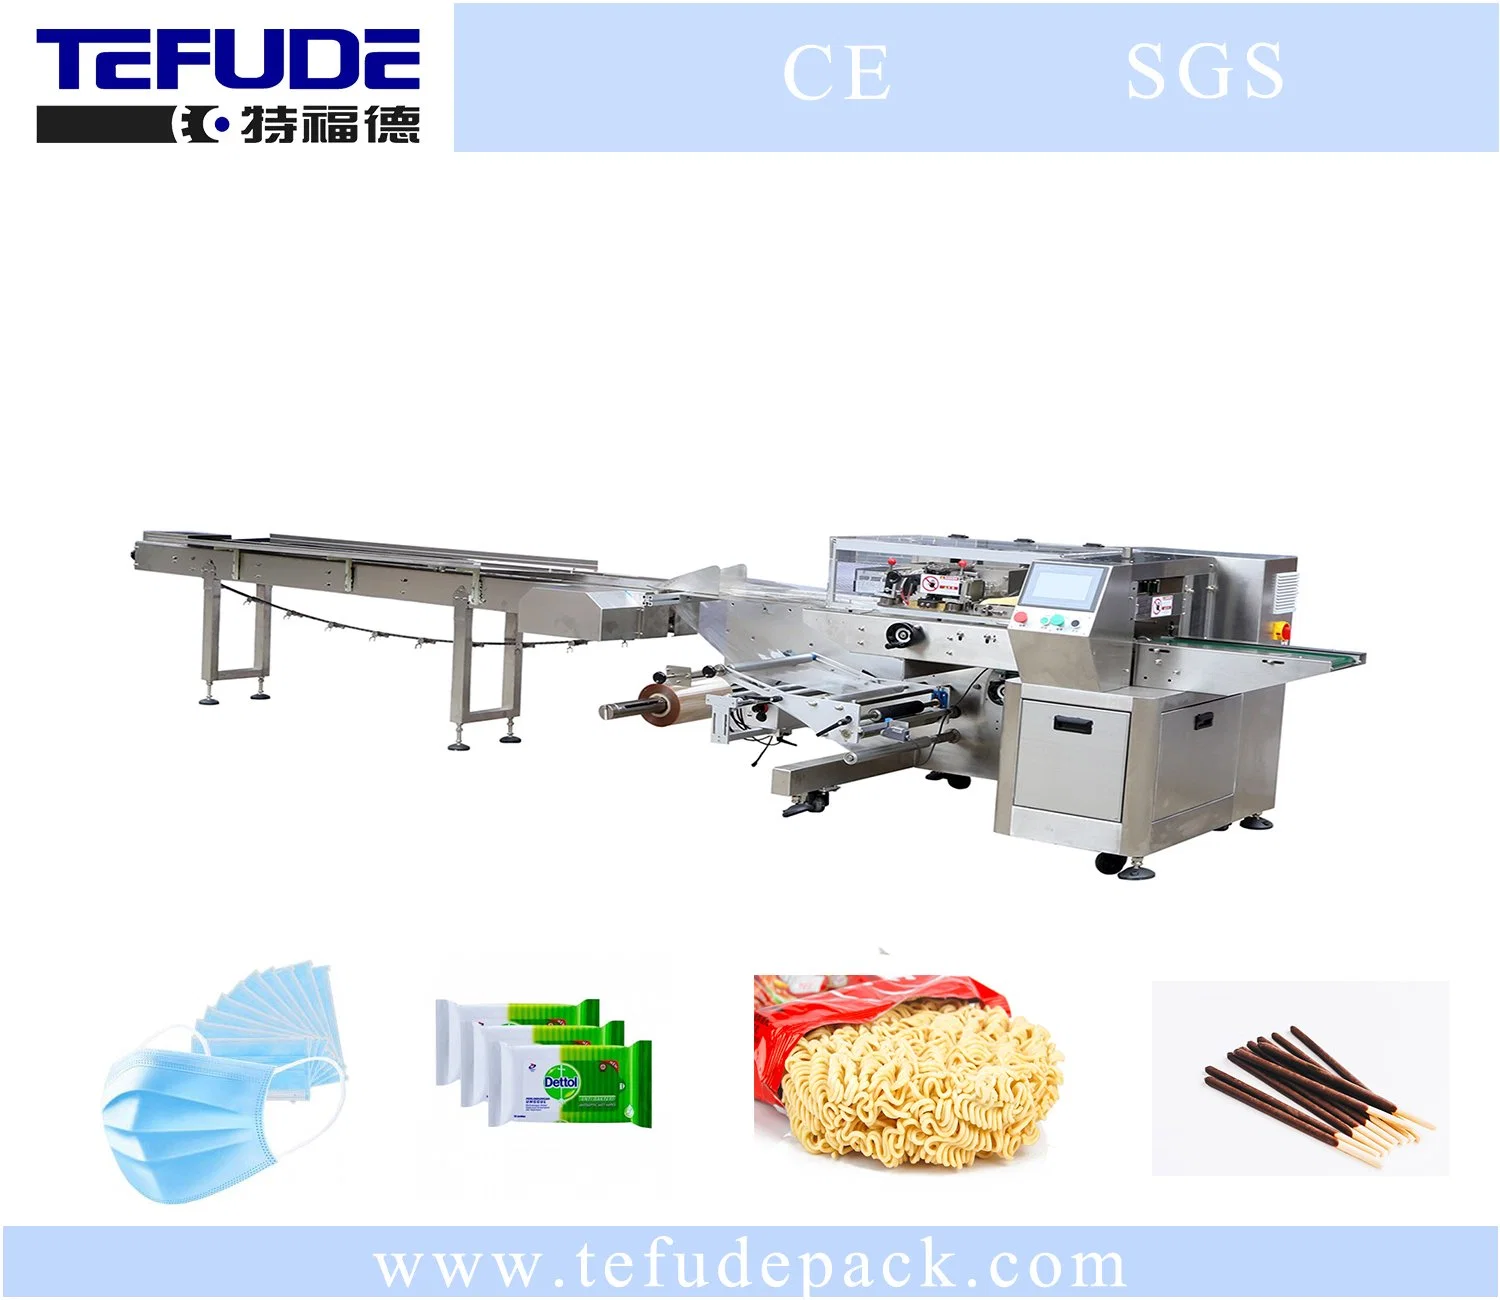 Automatic Horizontal Tissue Packing Machine Horizontal Flow Packing Machine Fully Automatic Pack Mask, Gloves, Disposable Items